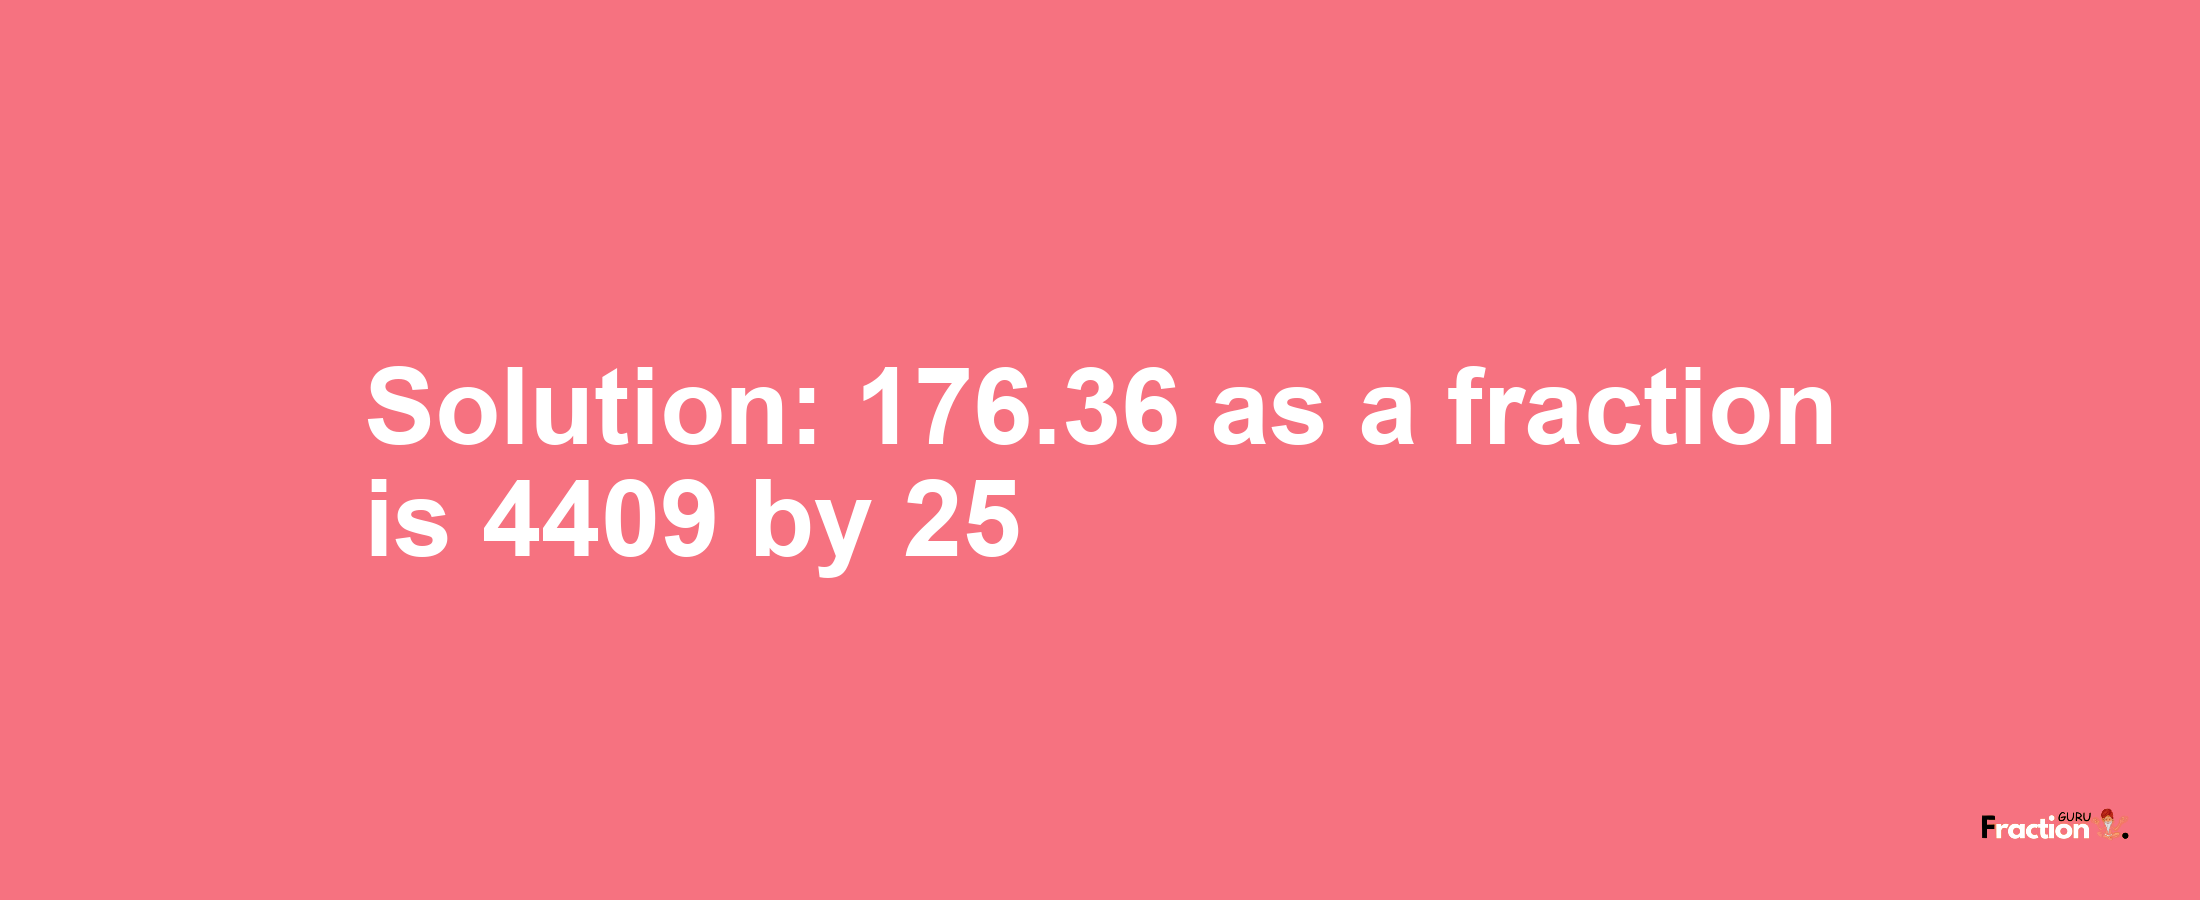 Solution:176.36 as a fraction is 4409/25